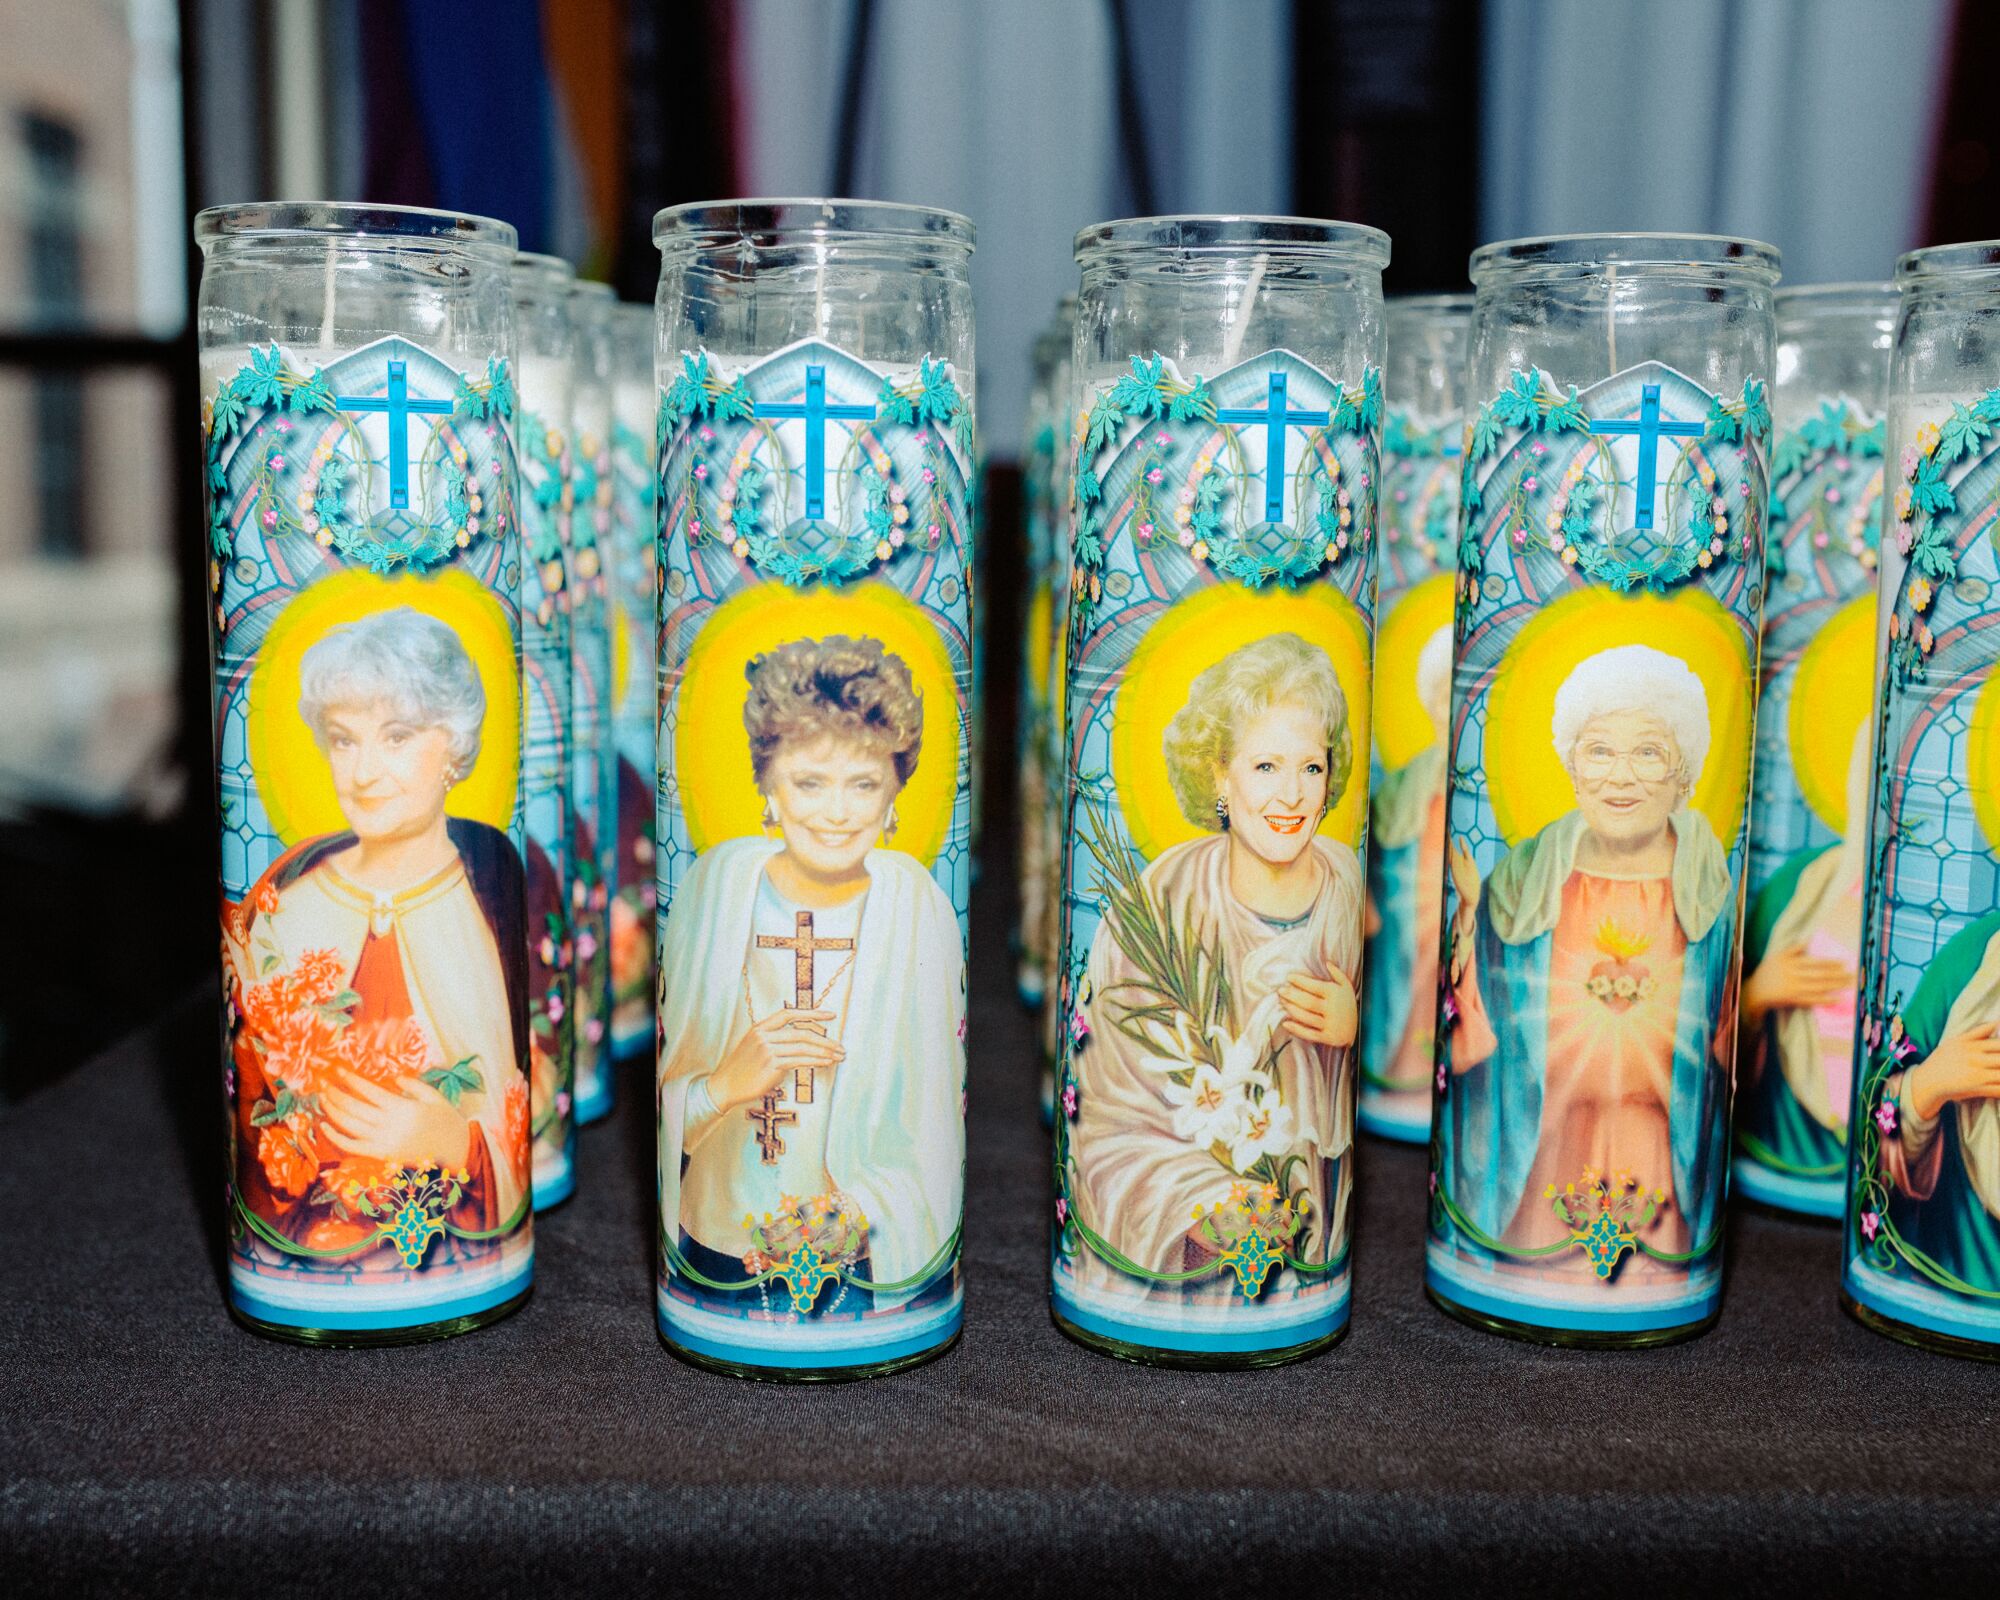 Religious candles with characters from "The Golden Girls" on them.